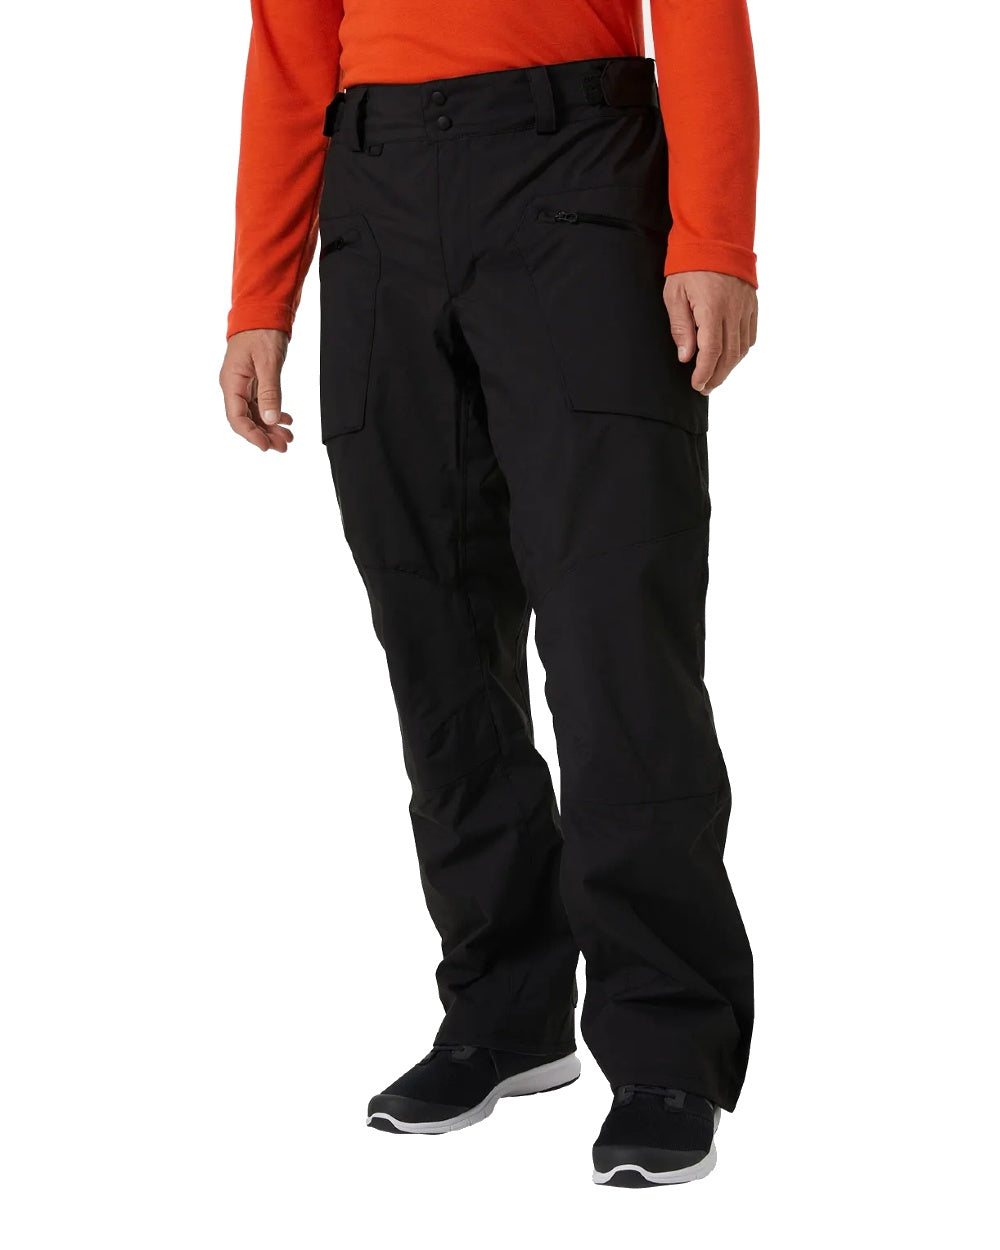 Ebony coloured Helly Hansen Mens HP Foil Sailing Pants on white background 